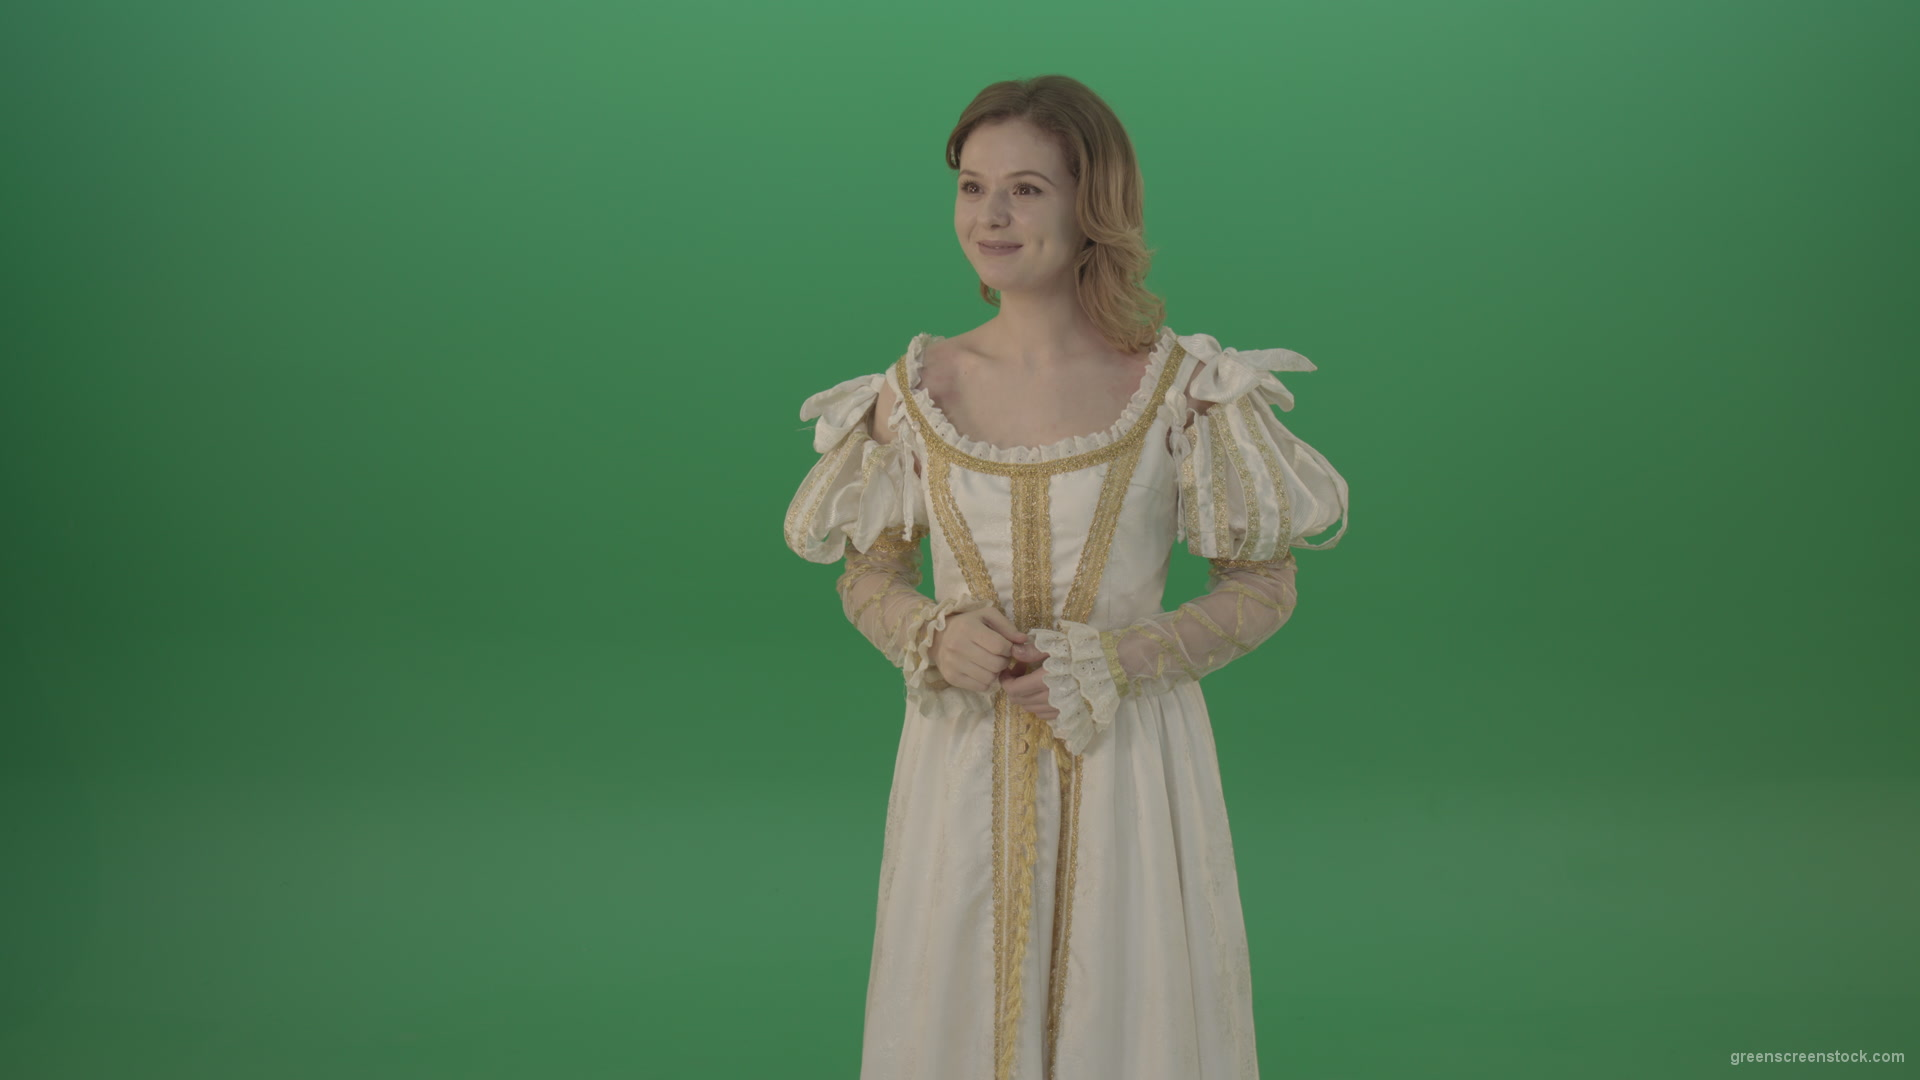 Flipping-a-virtual-reality-screen-the-girl-gladly-looks-at-the-photo-isolated-on-green-screen_009 Green Screen Stock